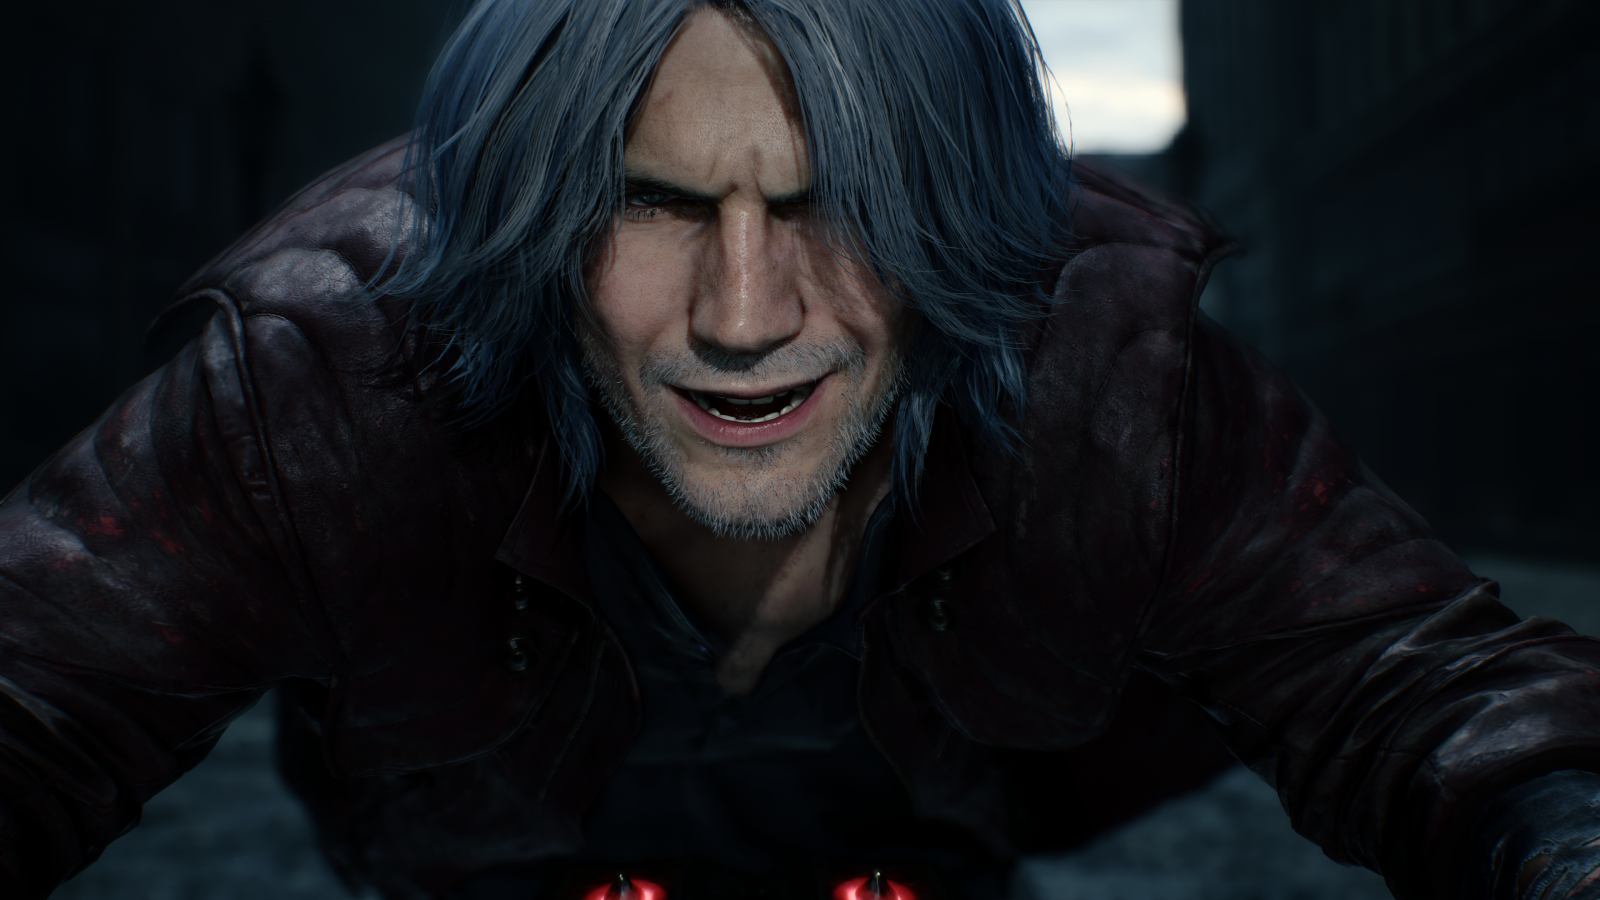 devil may cry 5 review